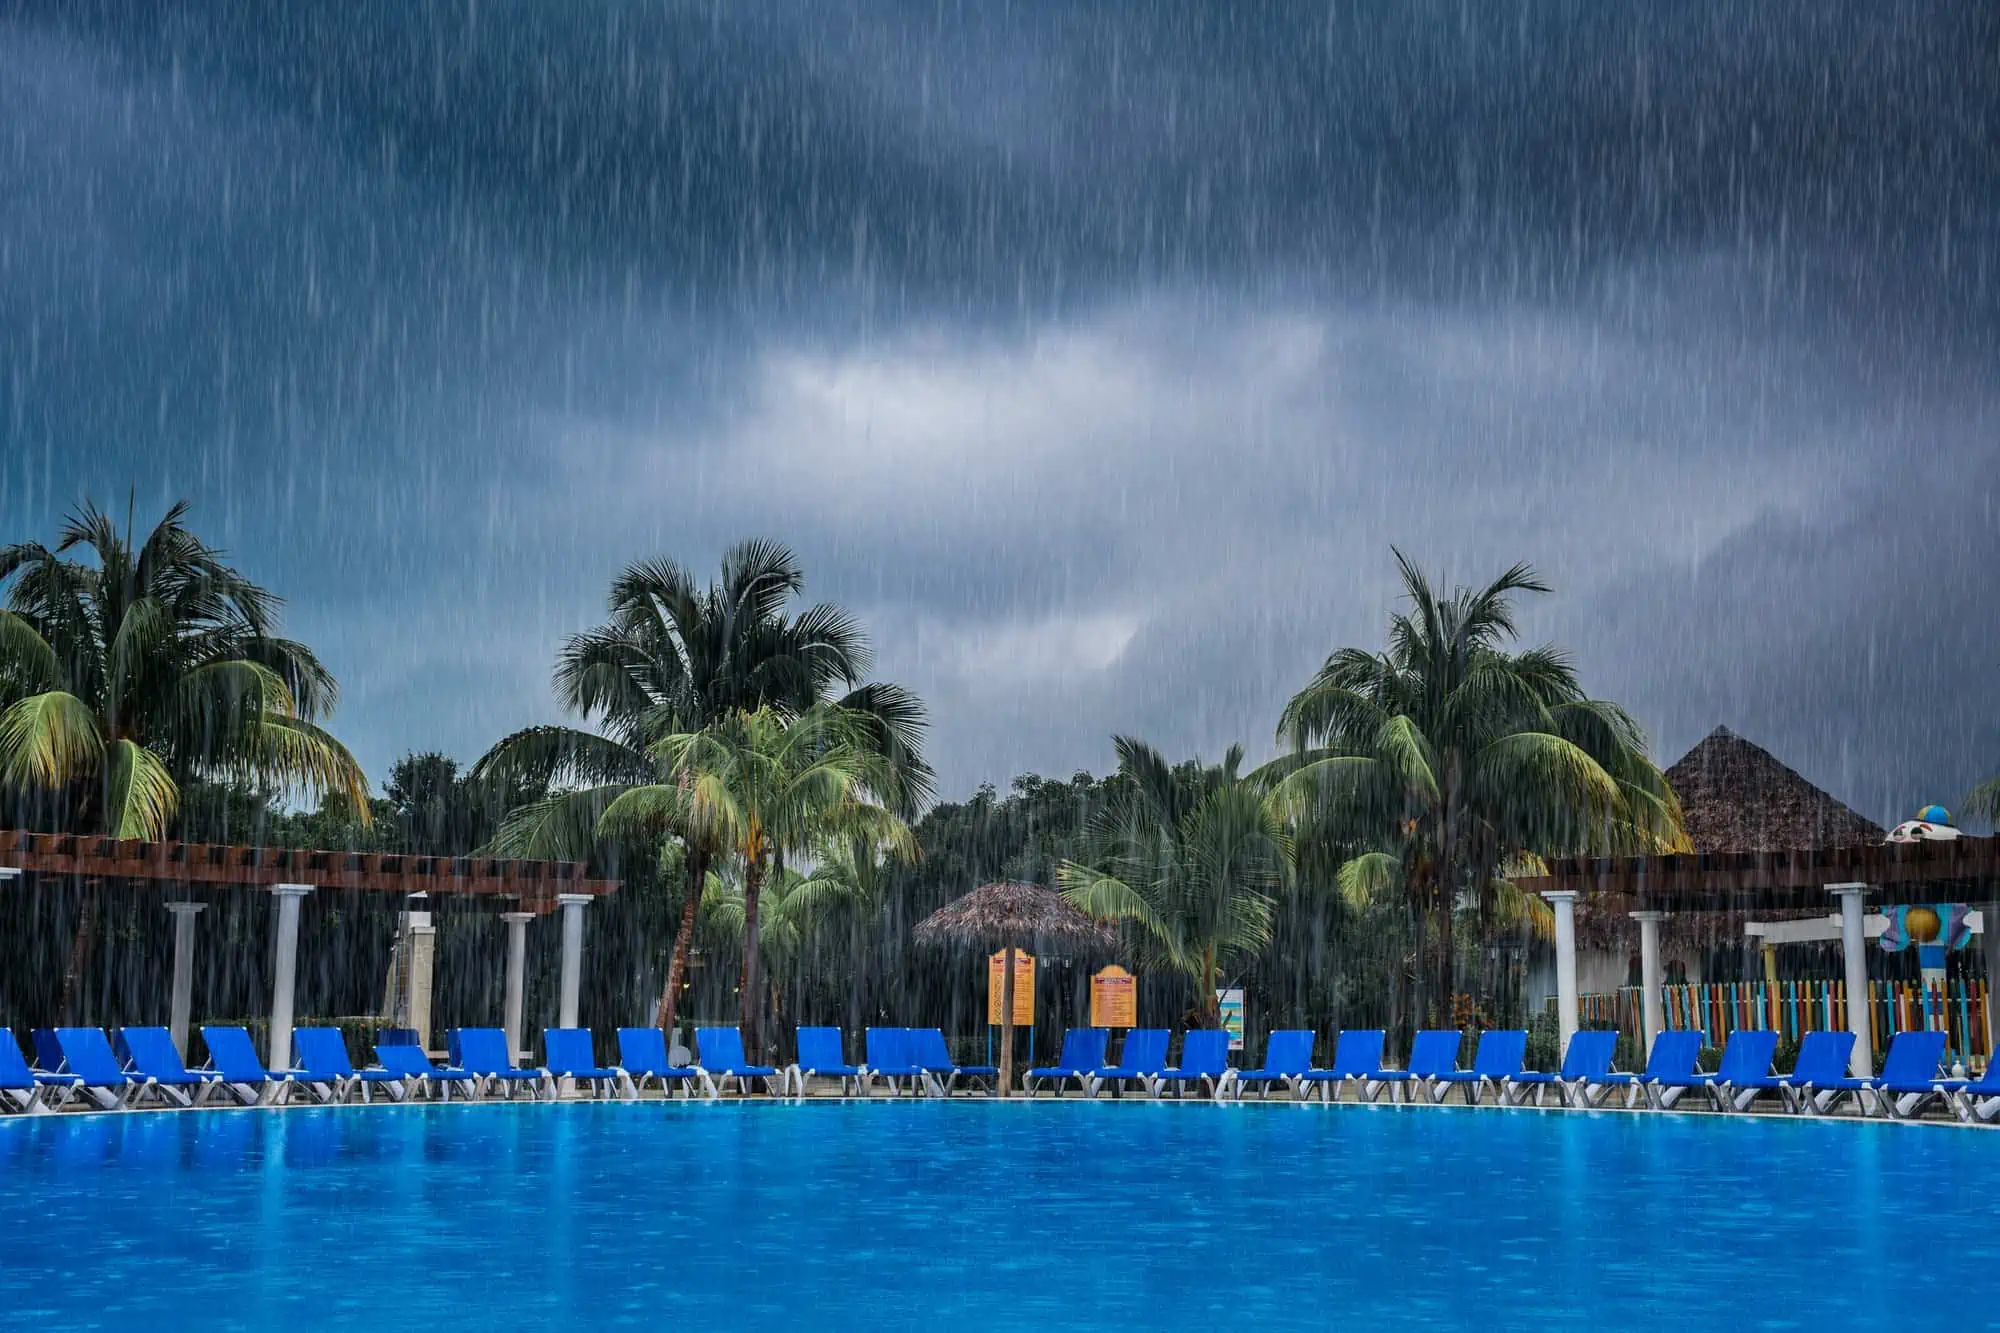 Bad Weather During Vacation at the Pool